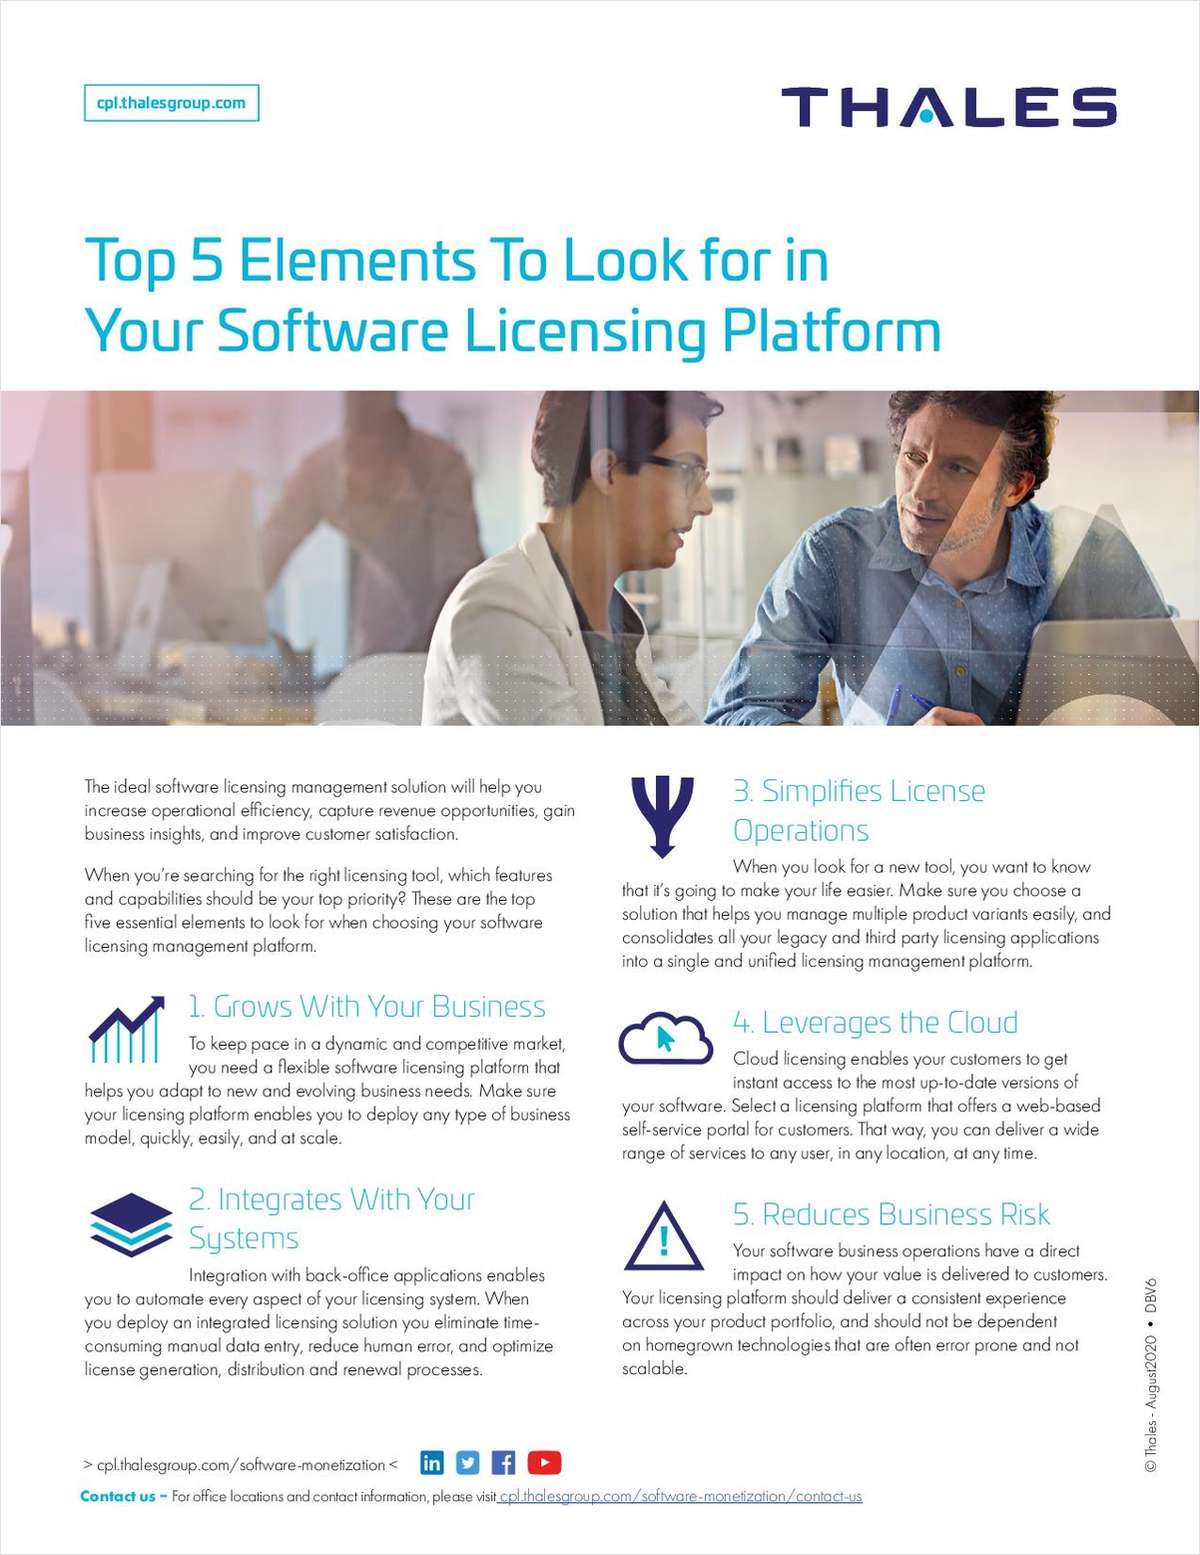 Top 5 Elements To Look for in Your Software Licensing Platform